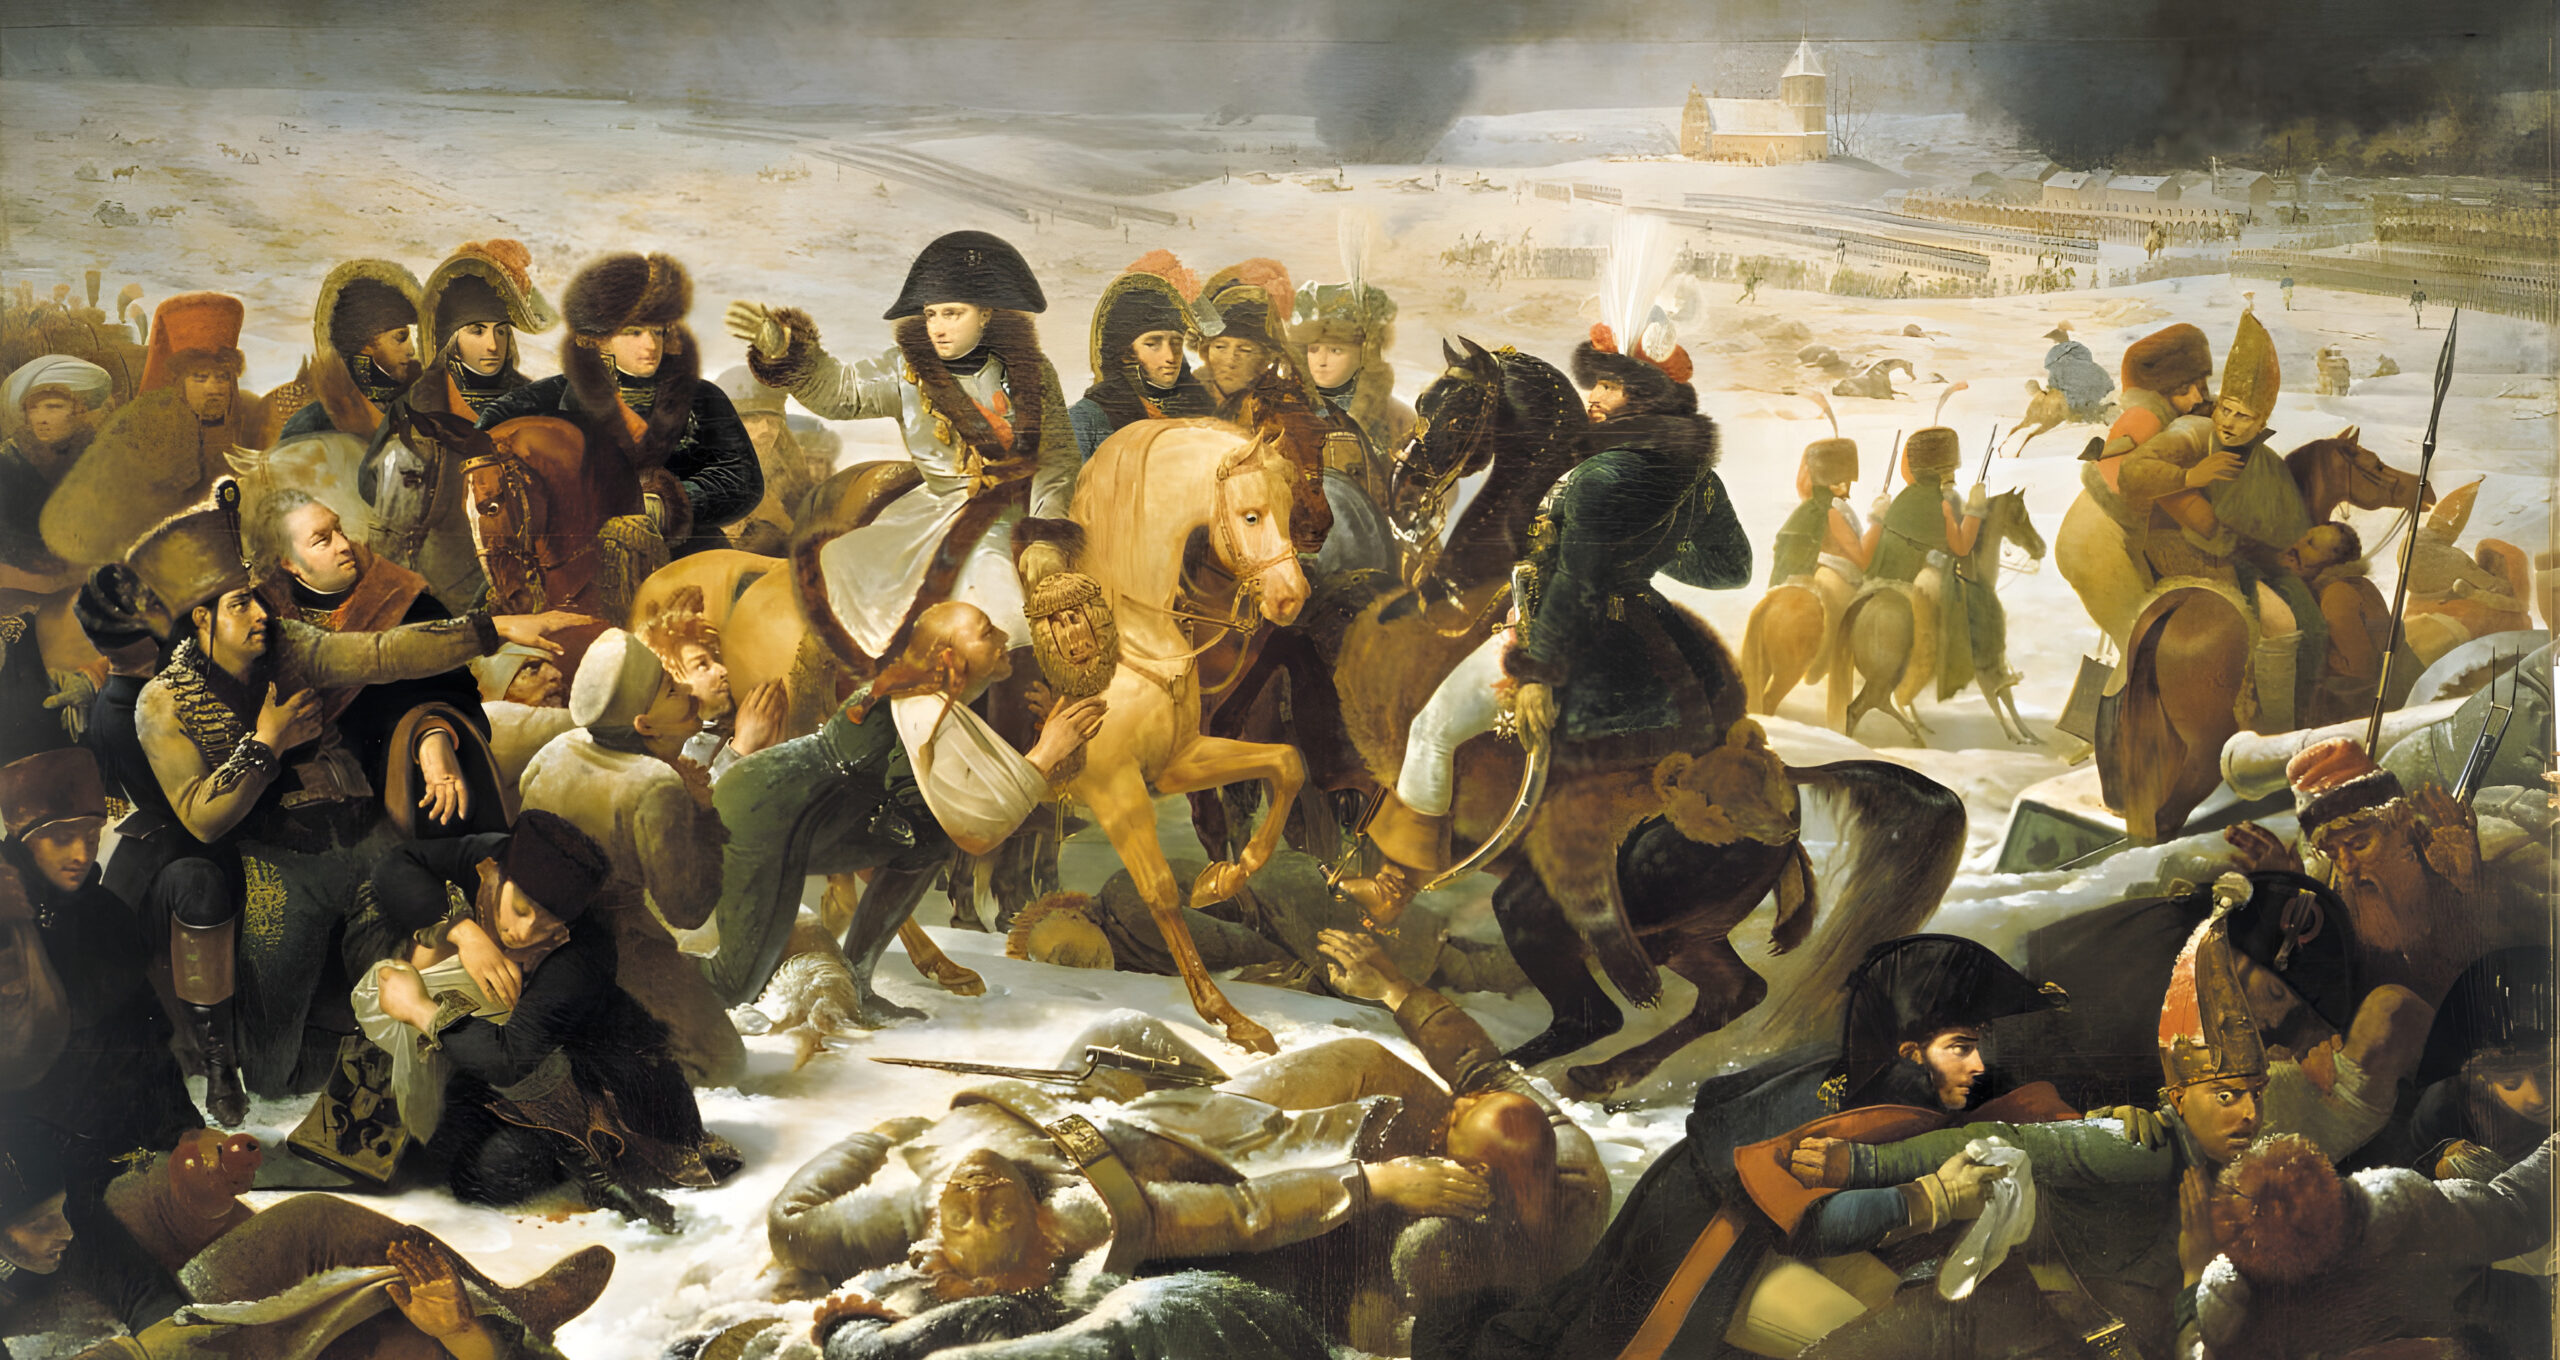 Having heard that the Russians claimed a victory, Napoleon commissioned a painting showing that he was the victor. The results depict the Emperor visiting the frozen field of the struggle, surrounded by the defeated begging for mercy.